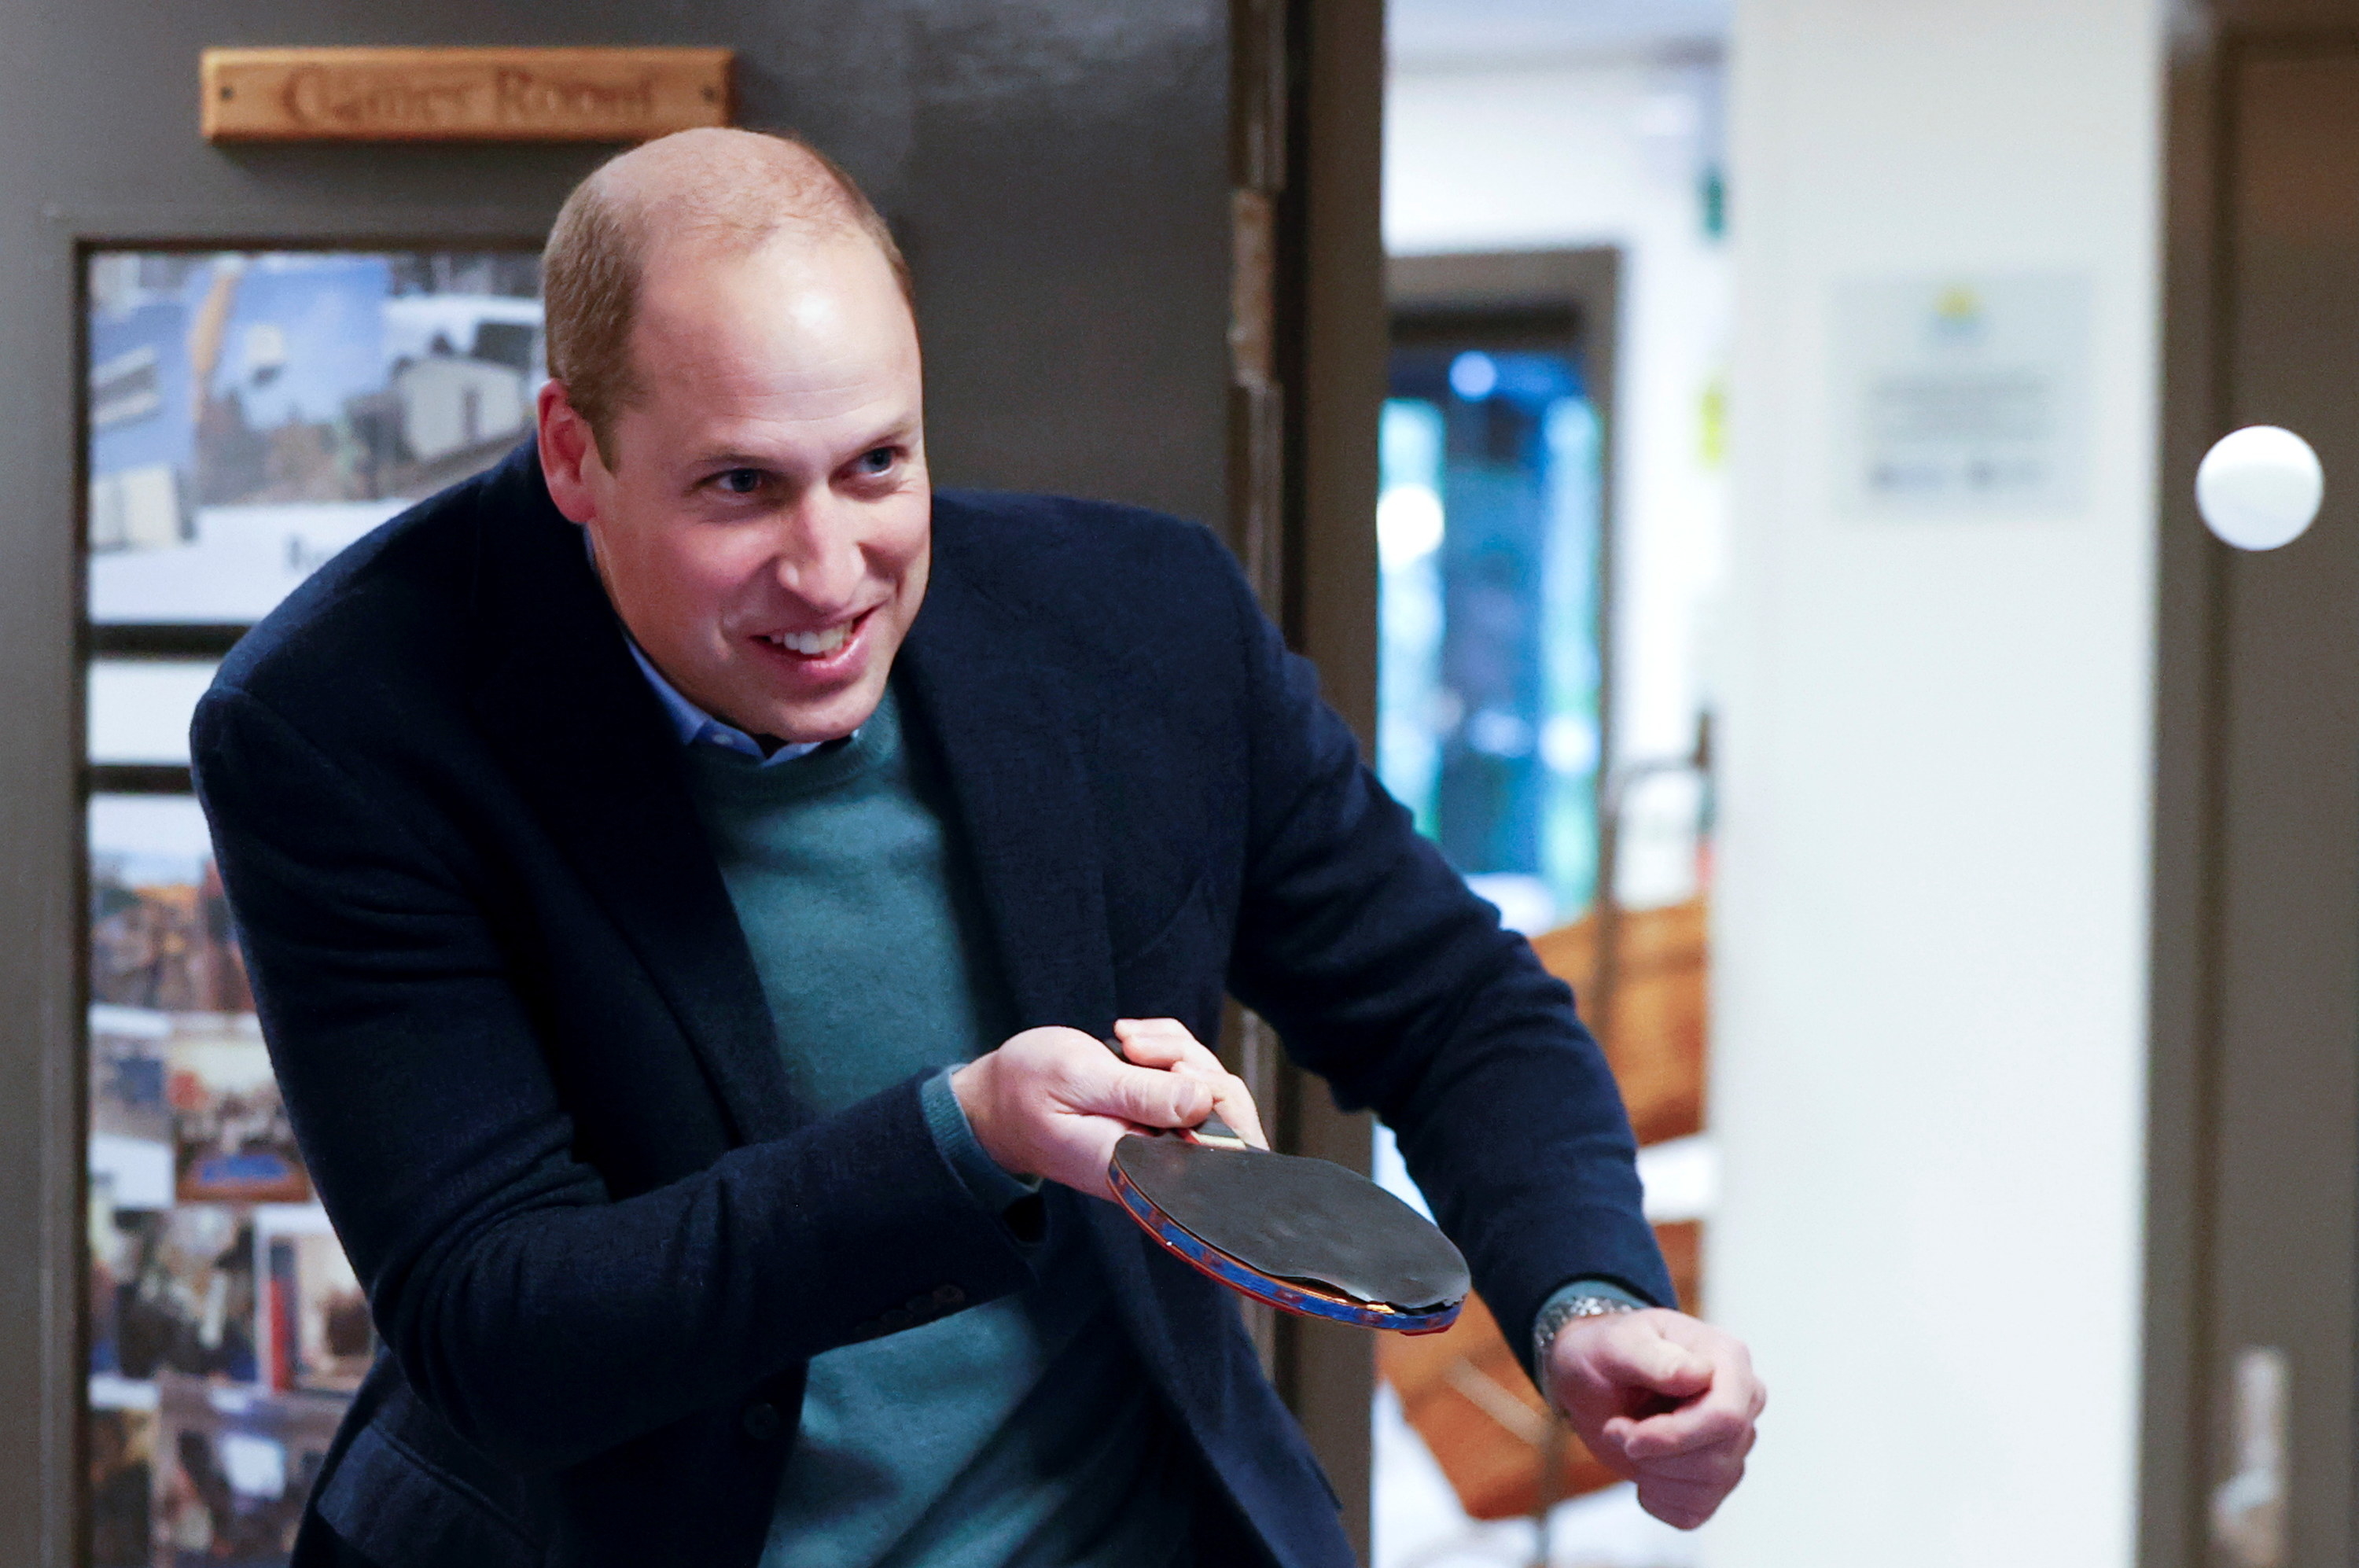 Prince William is playing ping-pong